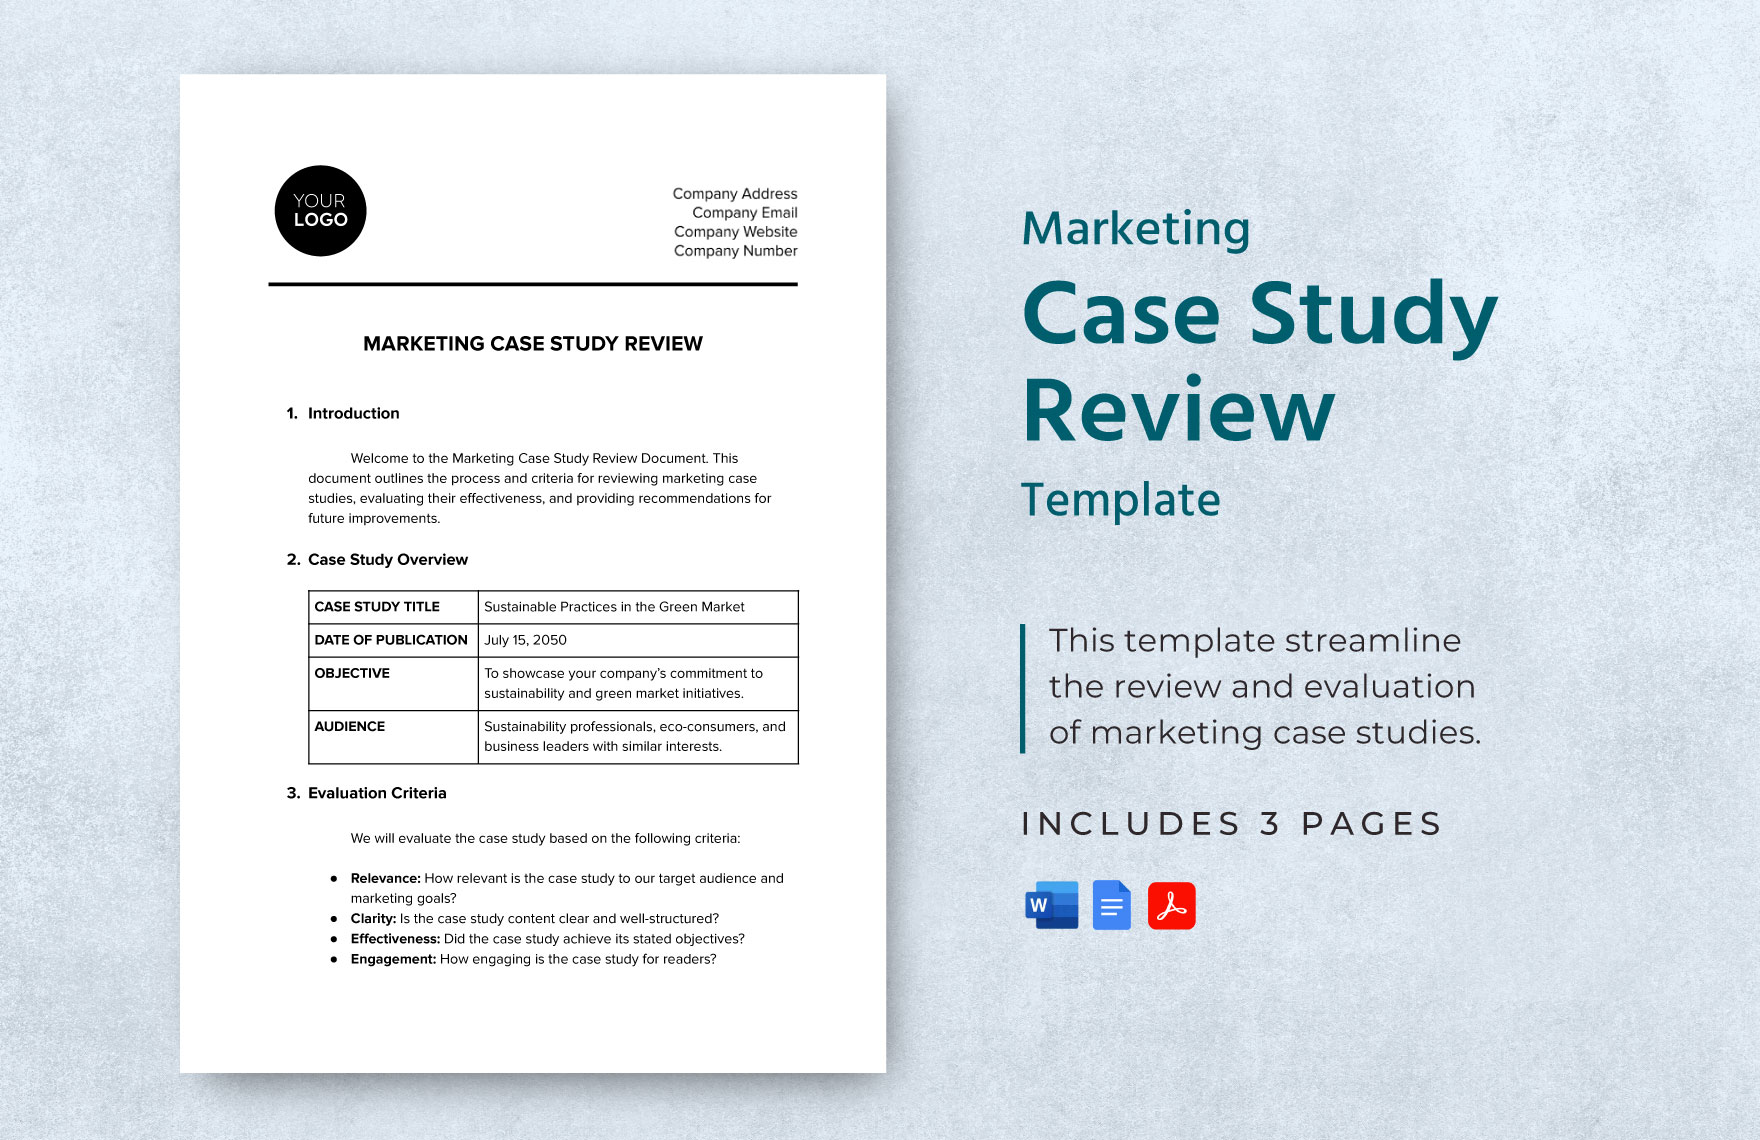 Marketing Case Study Review Template